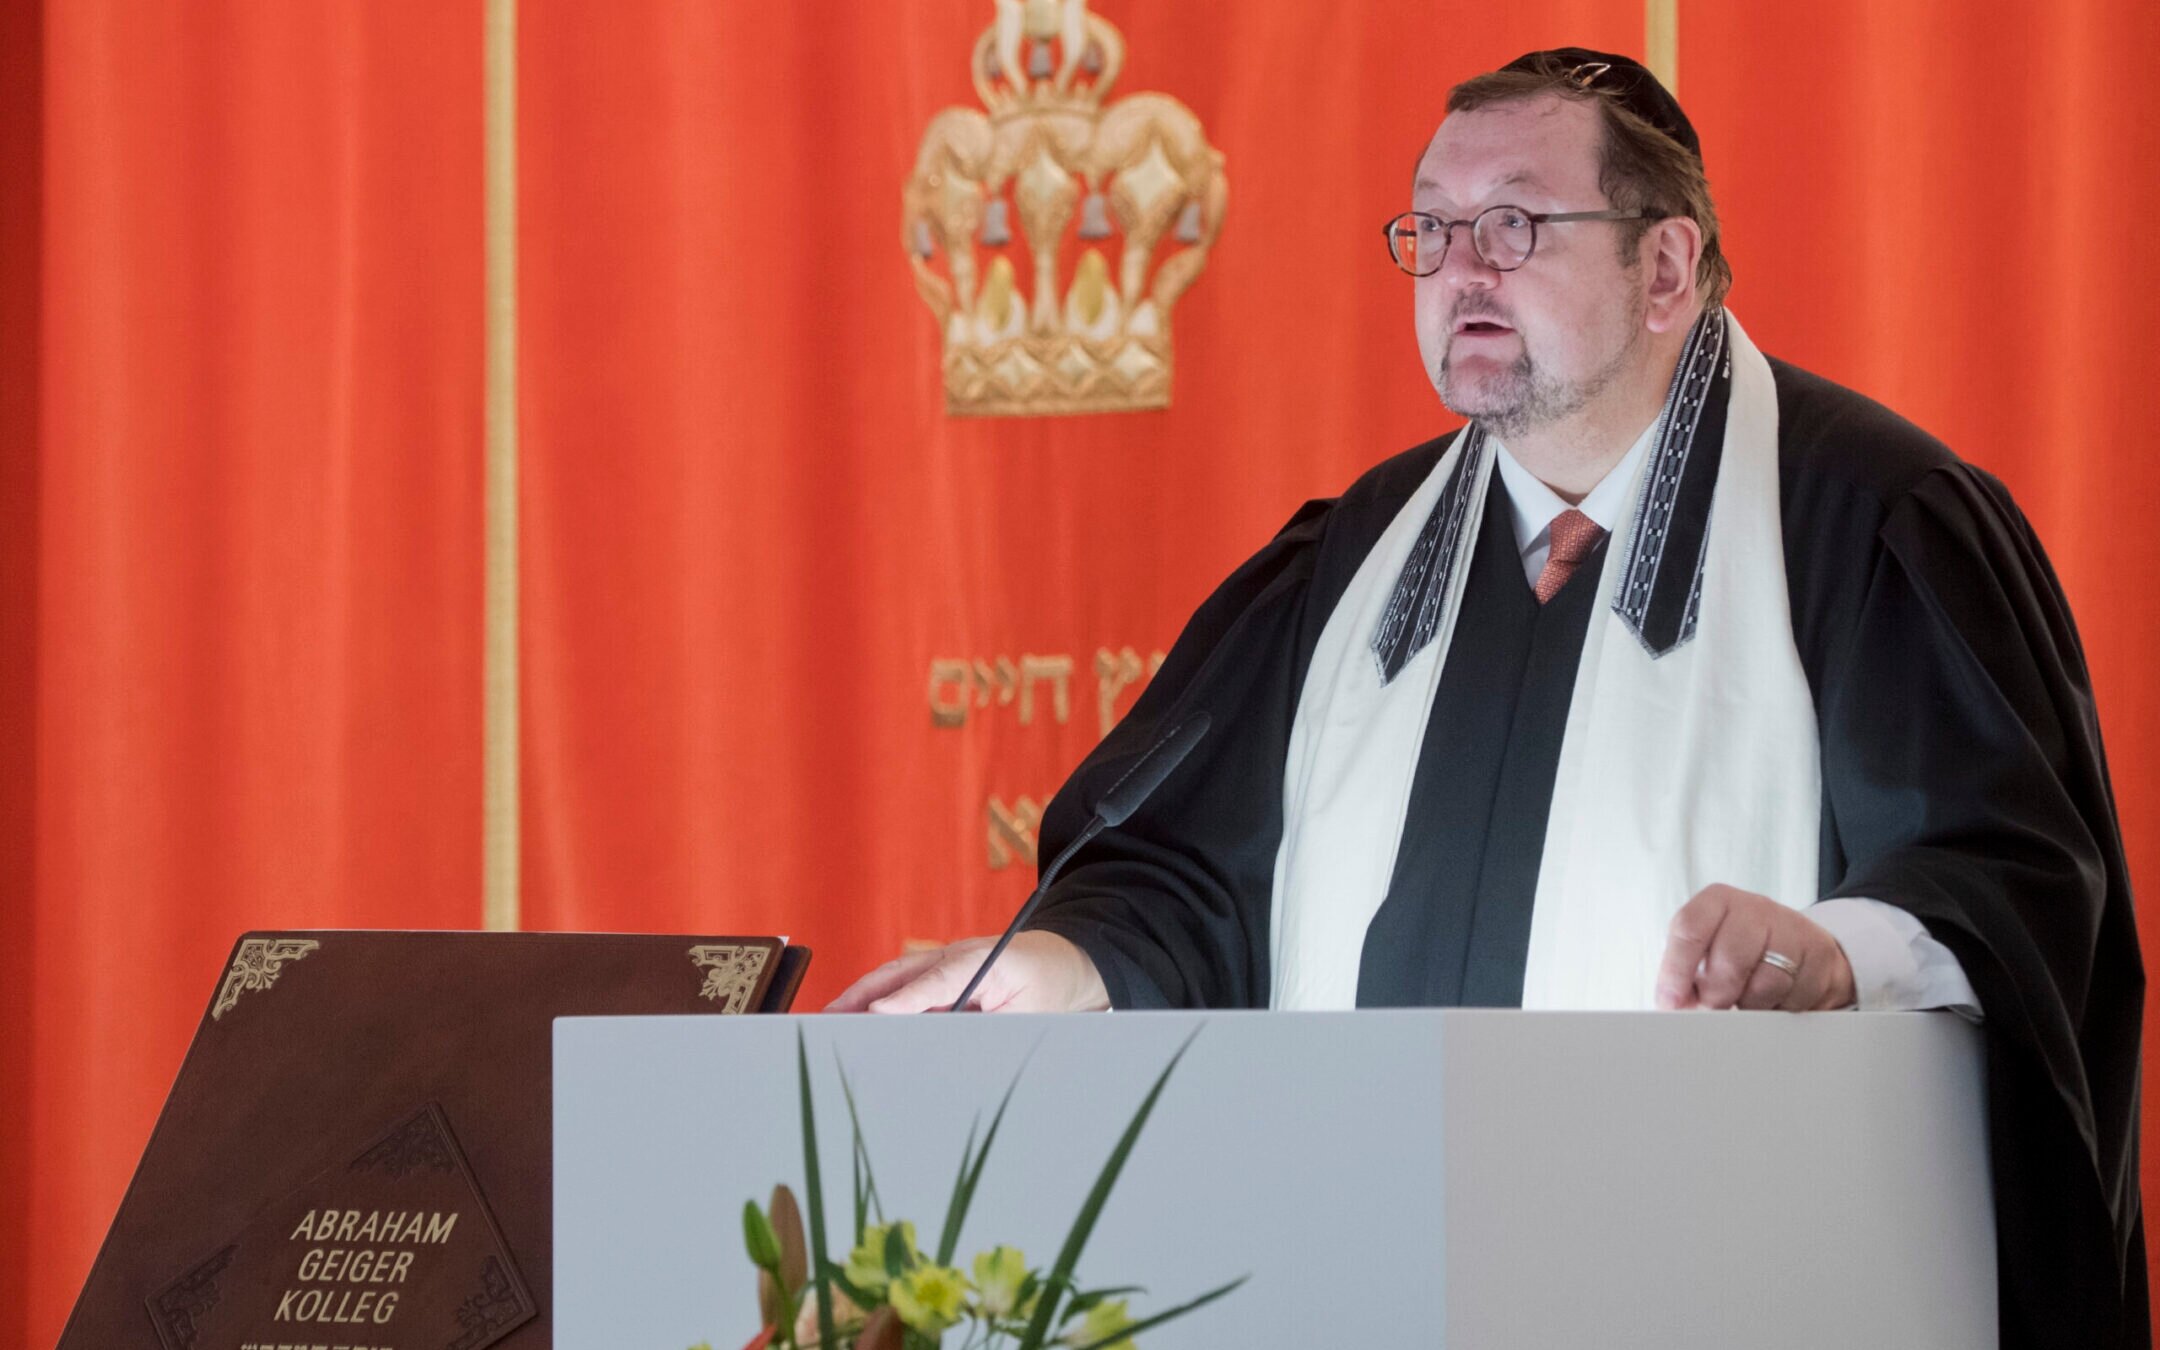 Rabbi Walter Homolka, rector of the Abraham Geiger College, in the Liberal Jewish community’s synagogue in Hanover, Germany in December 2016. (Julian Stratenschulte/picture alliance via Getty Images)